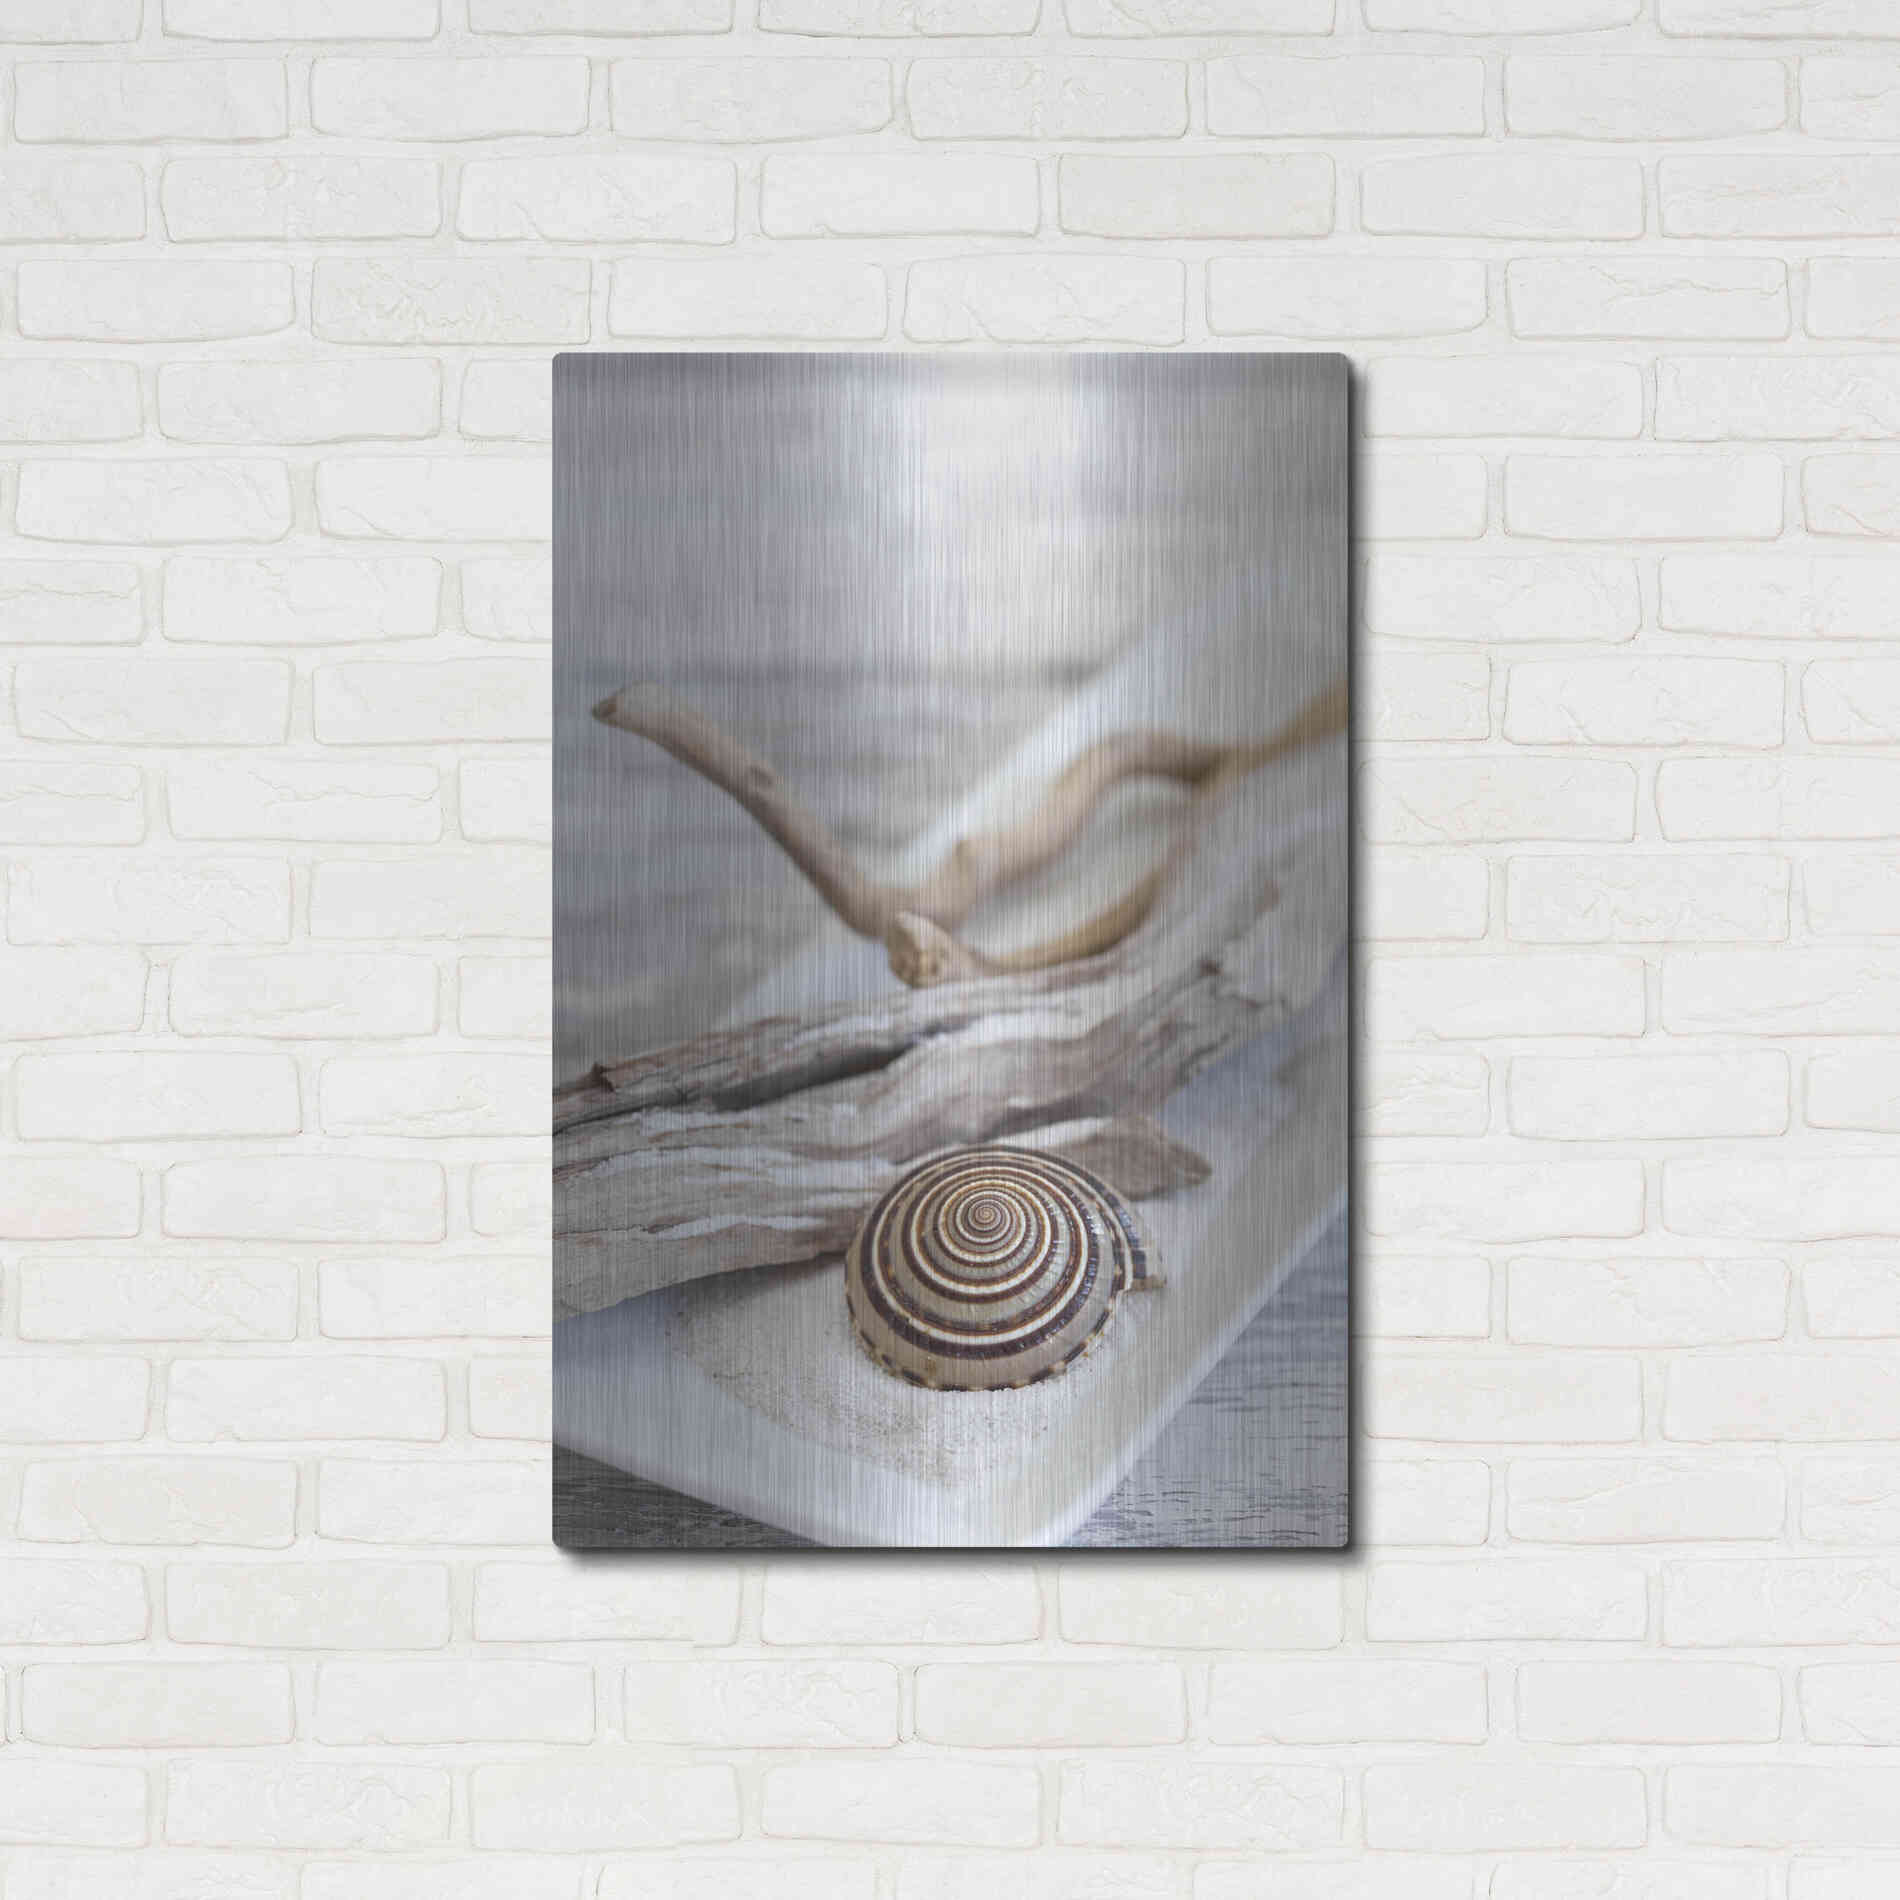 Luxe Metal Art 'Zen Style Driftwood Seashell Still' by Andrea Haase, Metal Wall At,24x36